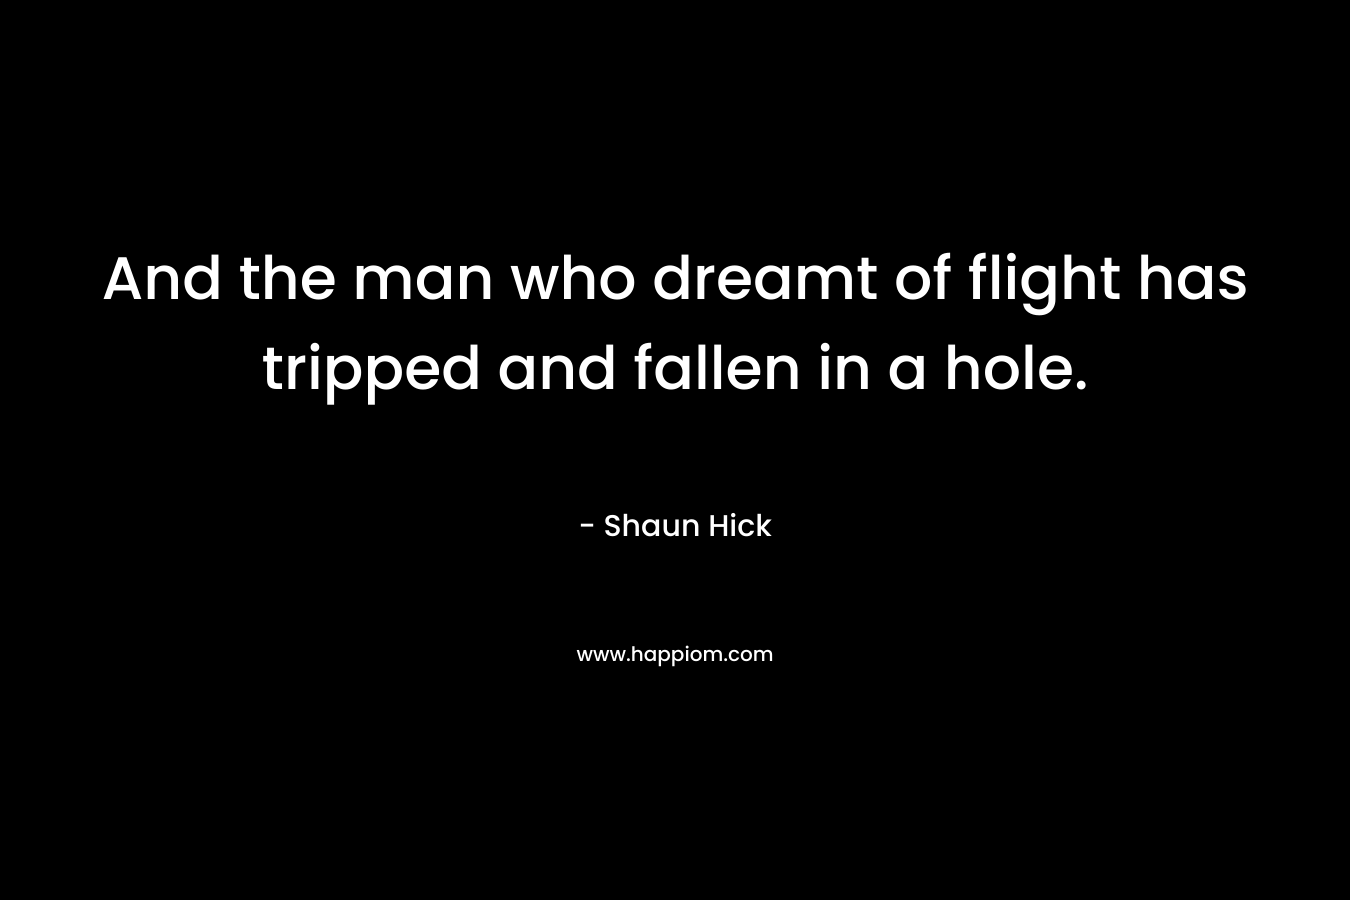 And the man who dreamt of flight has tripped and fallen in a hole. – Shaun Hick